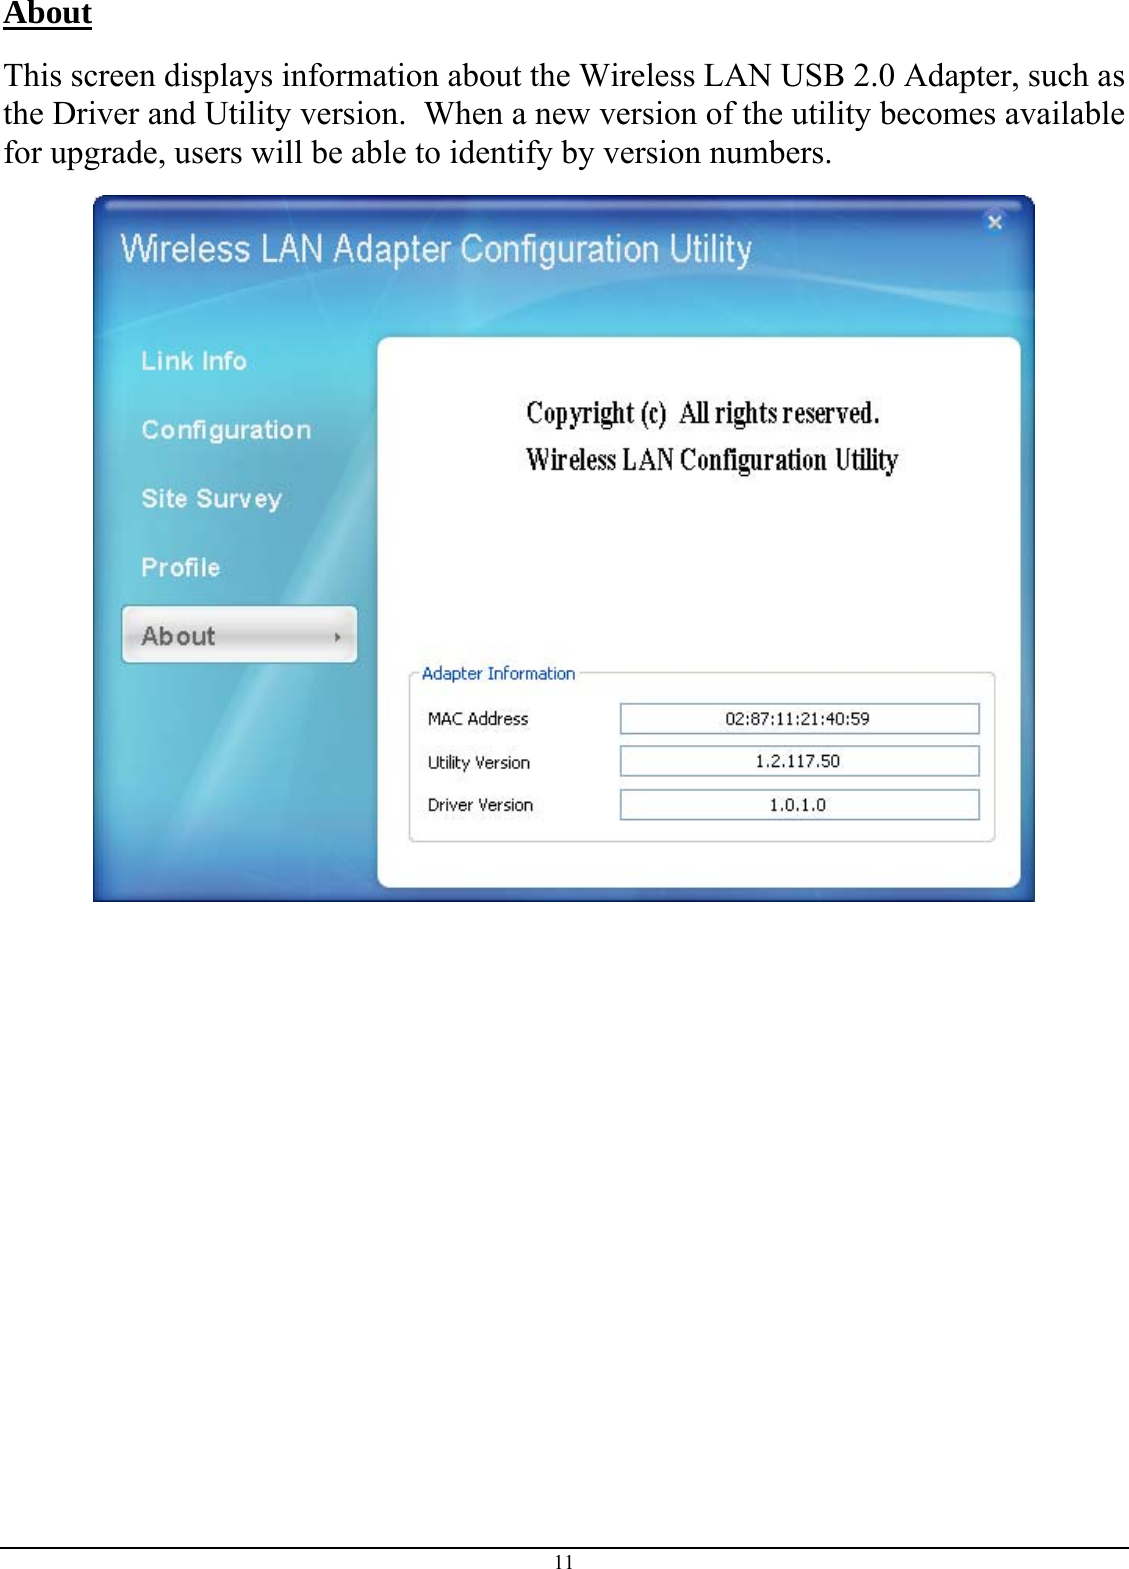 11 About  This screen displays information about the Wireless LAN USB 2.0 Adapter, such as the Driver and Utility version.  When a new version of the utility becomes available for upgrade, users will be able to identify by version numbers.  